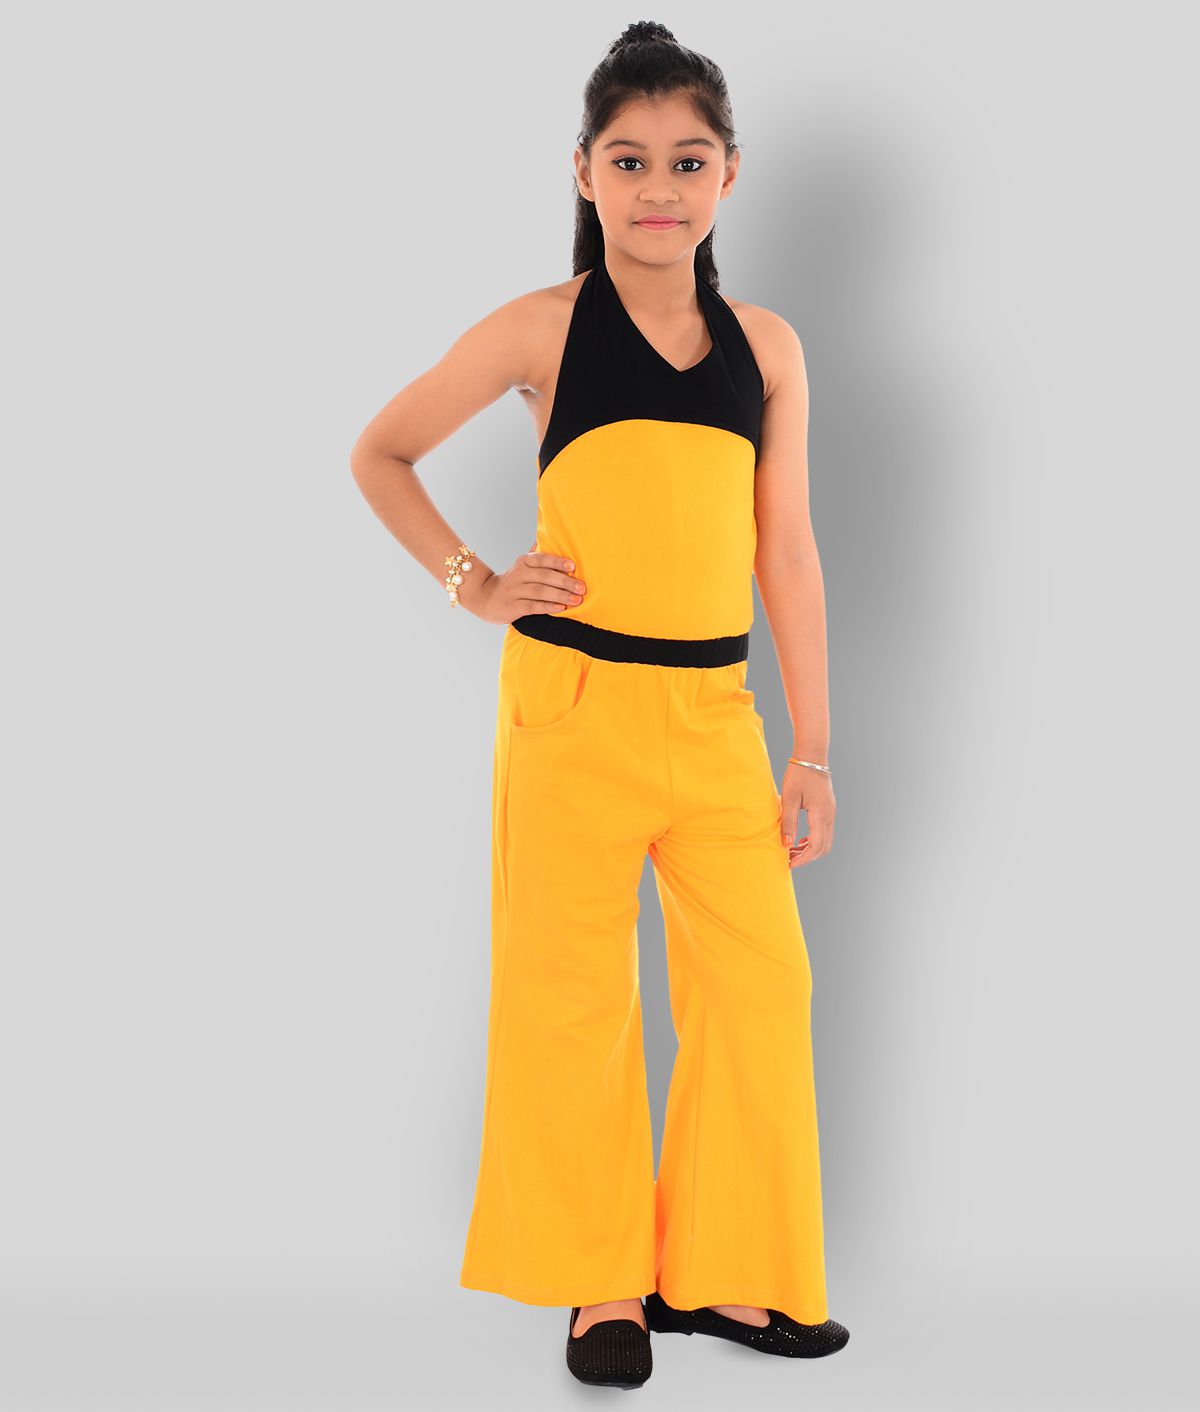     			Naughty Ninos - Yellow Cotton Blend Girls Jumpsuit ( Pack of 1 )